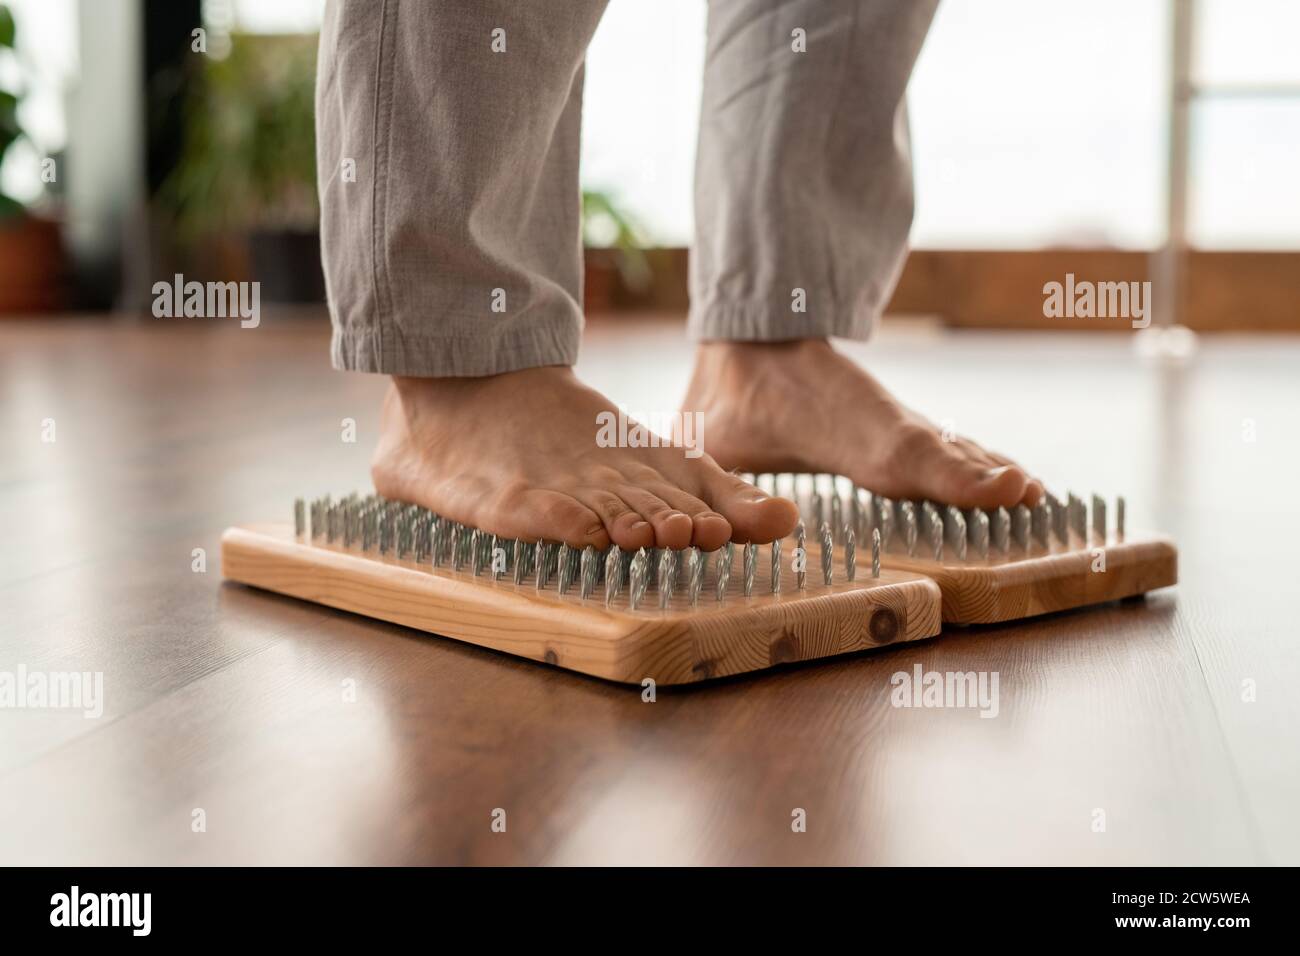 Legs of young barefoot man in sportspants standing on yoga pads with nails Stock Photo